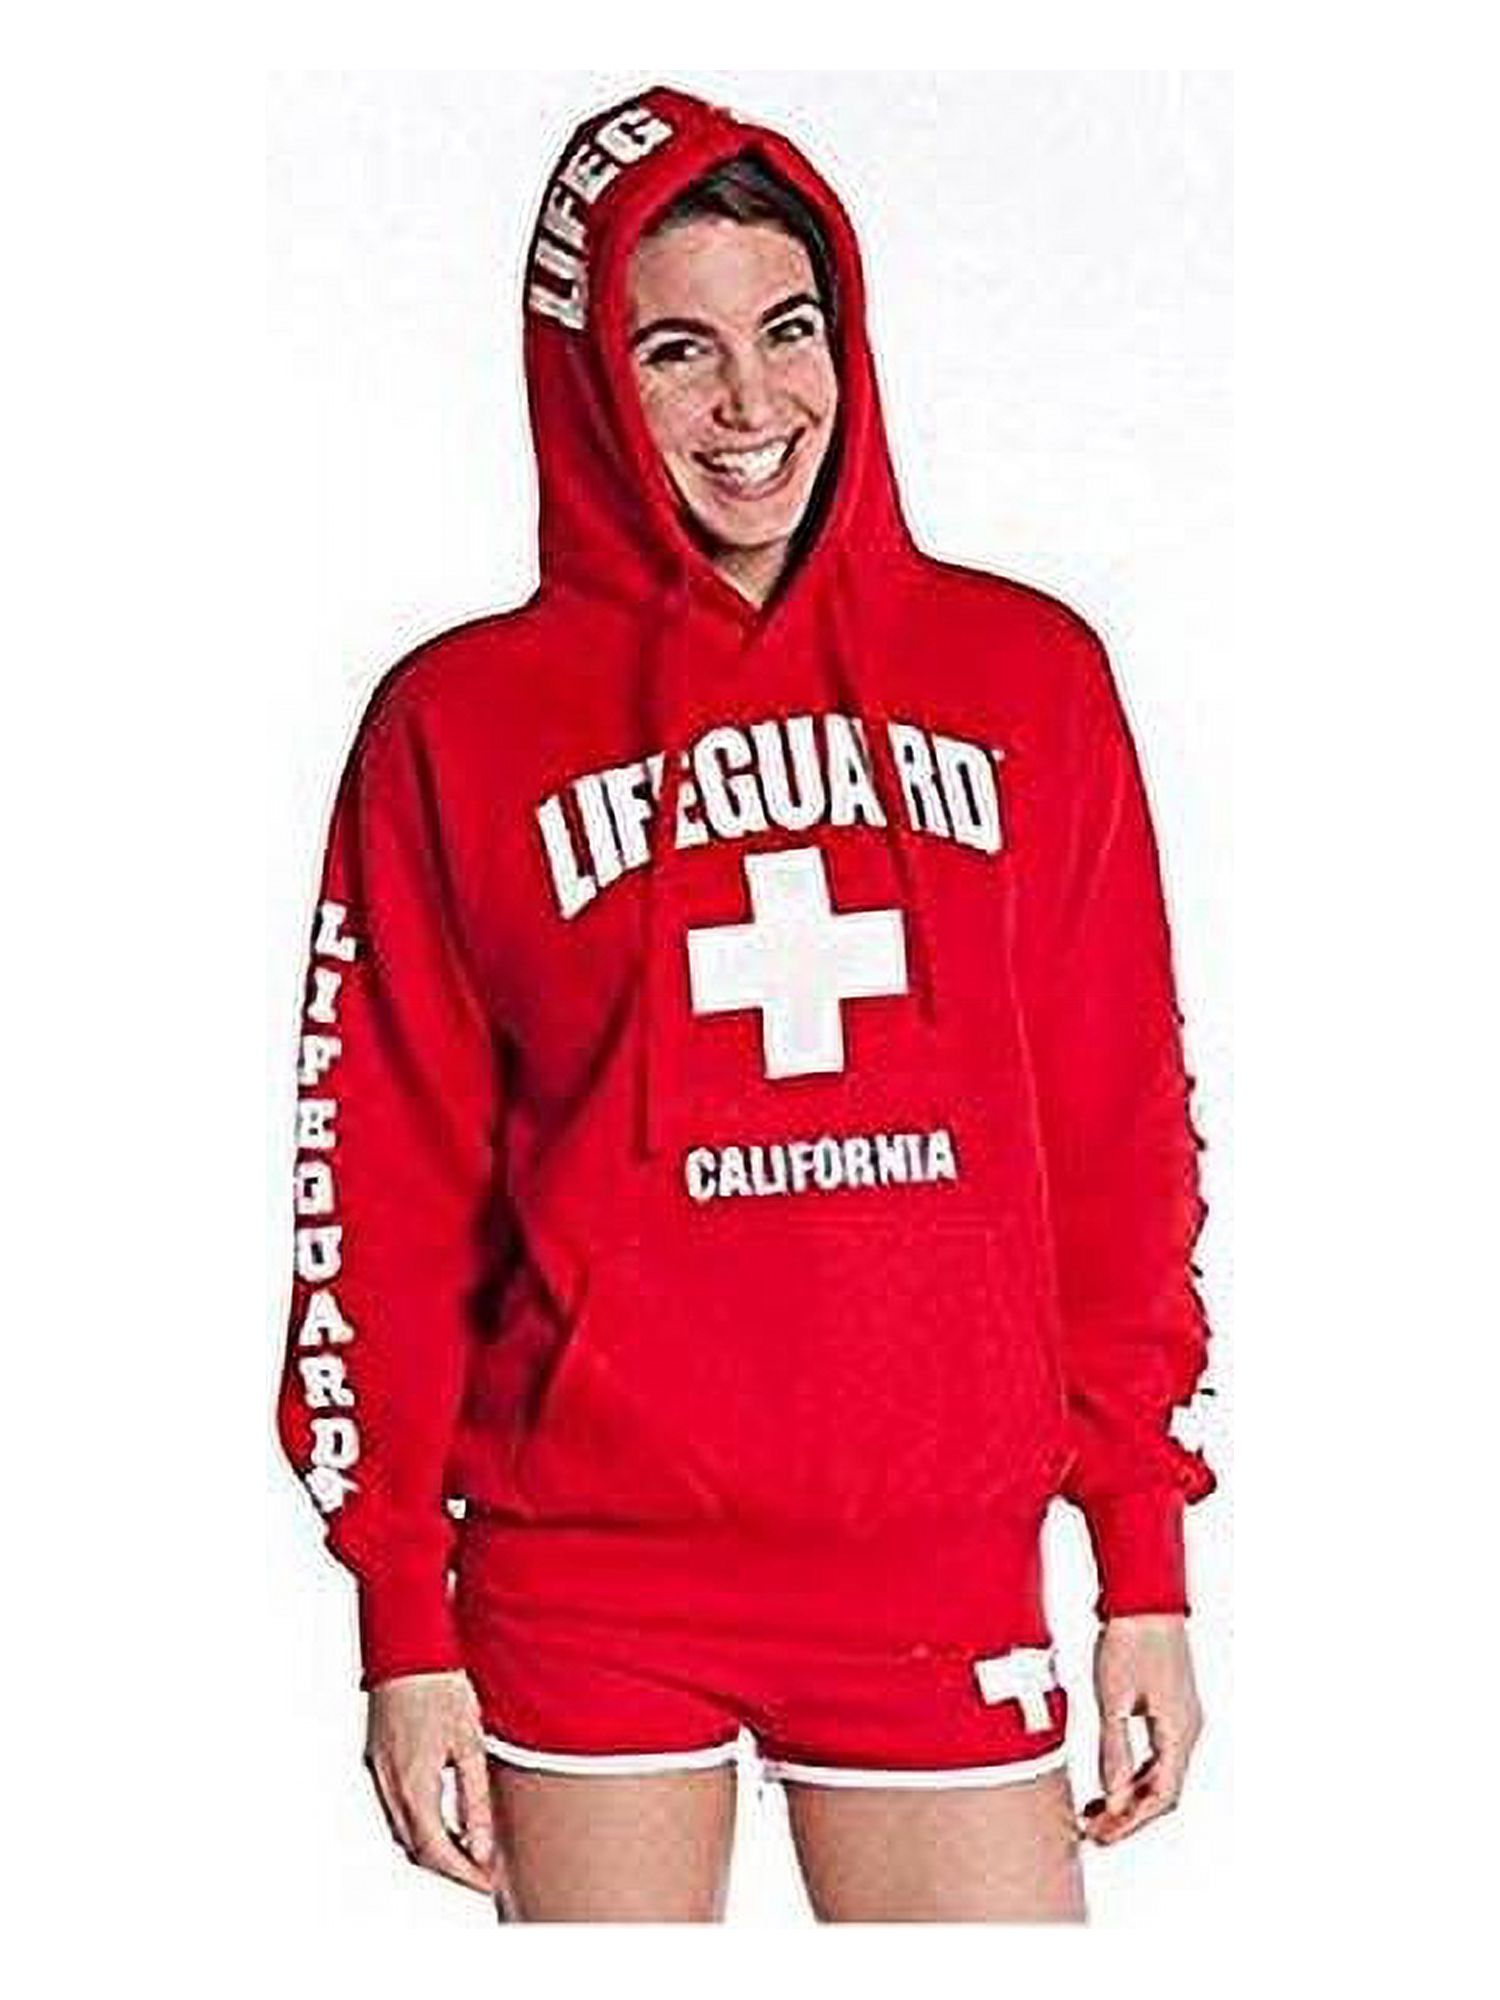 LIFEGUARD Officially Licensed Ladies California Hoodie Sweatshirt Apparel for Women, Teens and Girls Red - image 1 of 2